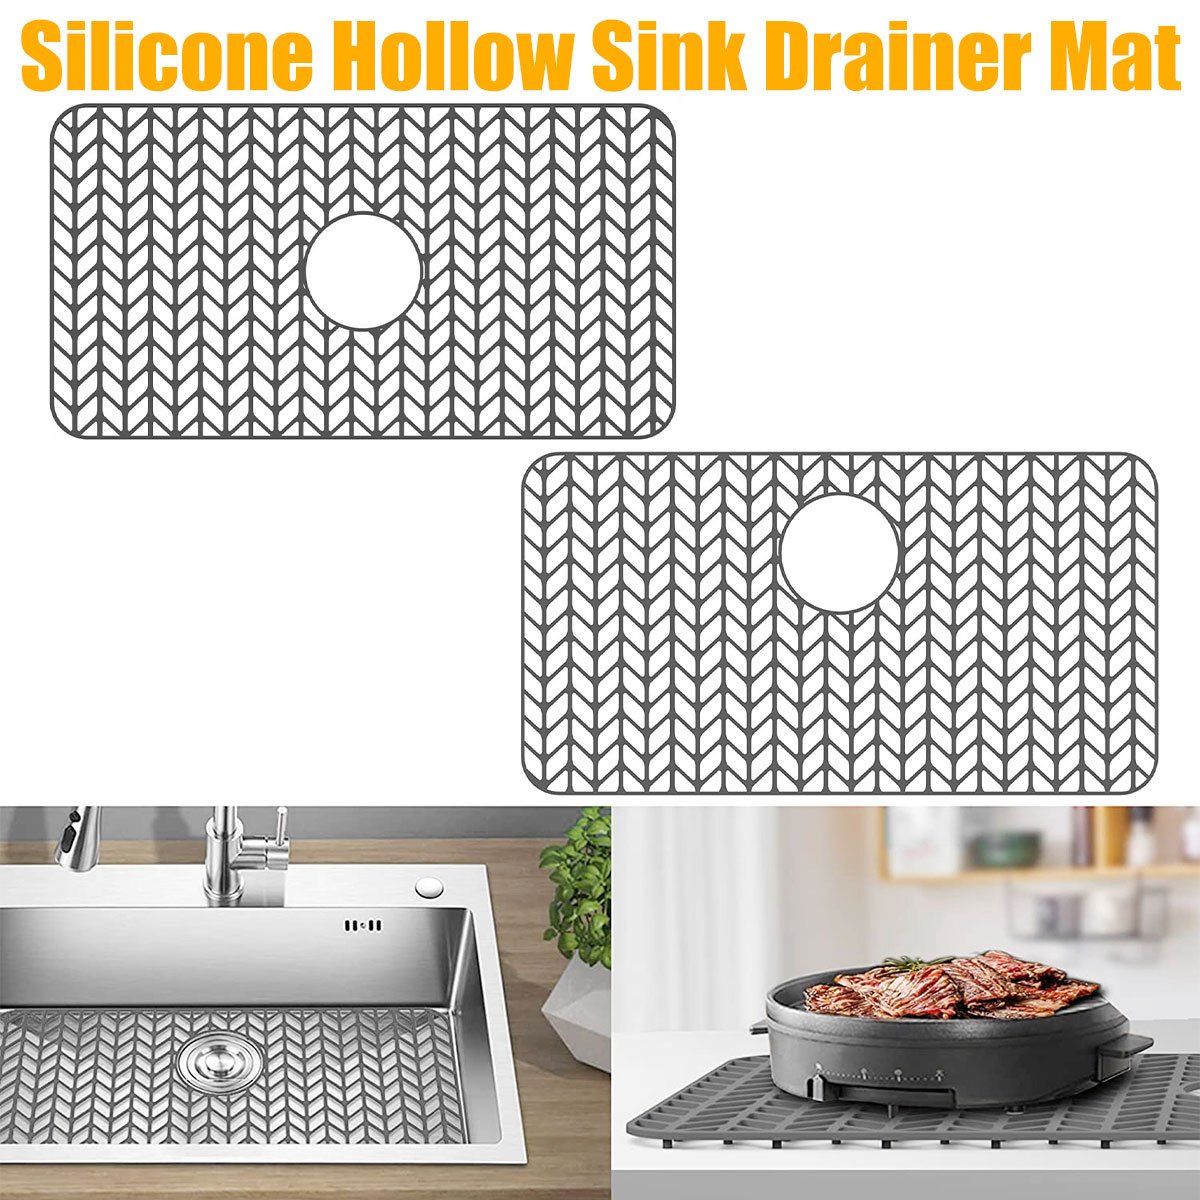 1pc Silicone Sink Saddle, Large And Durable Sink Divider Mat With No  Suction Cups, Kitchen Divided Sink Protector Mat For Glassware Dishes, Easy  To Cl